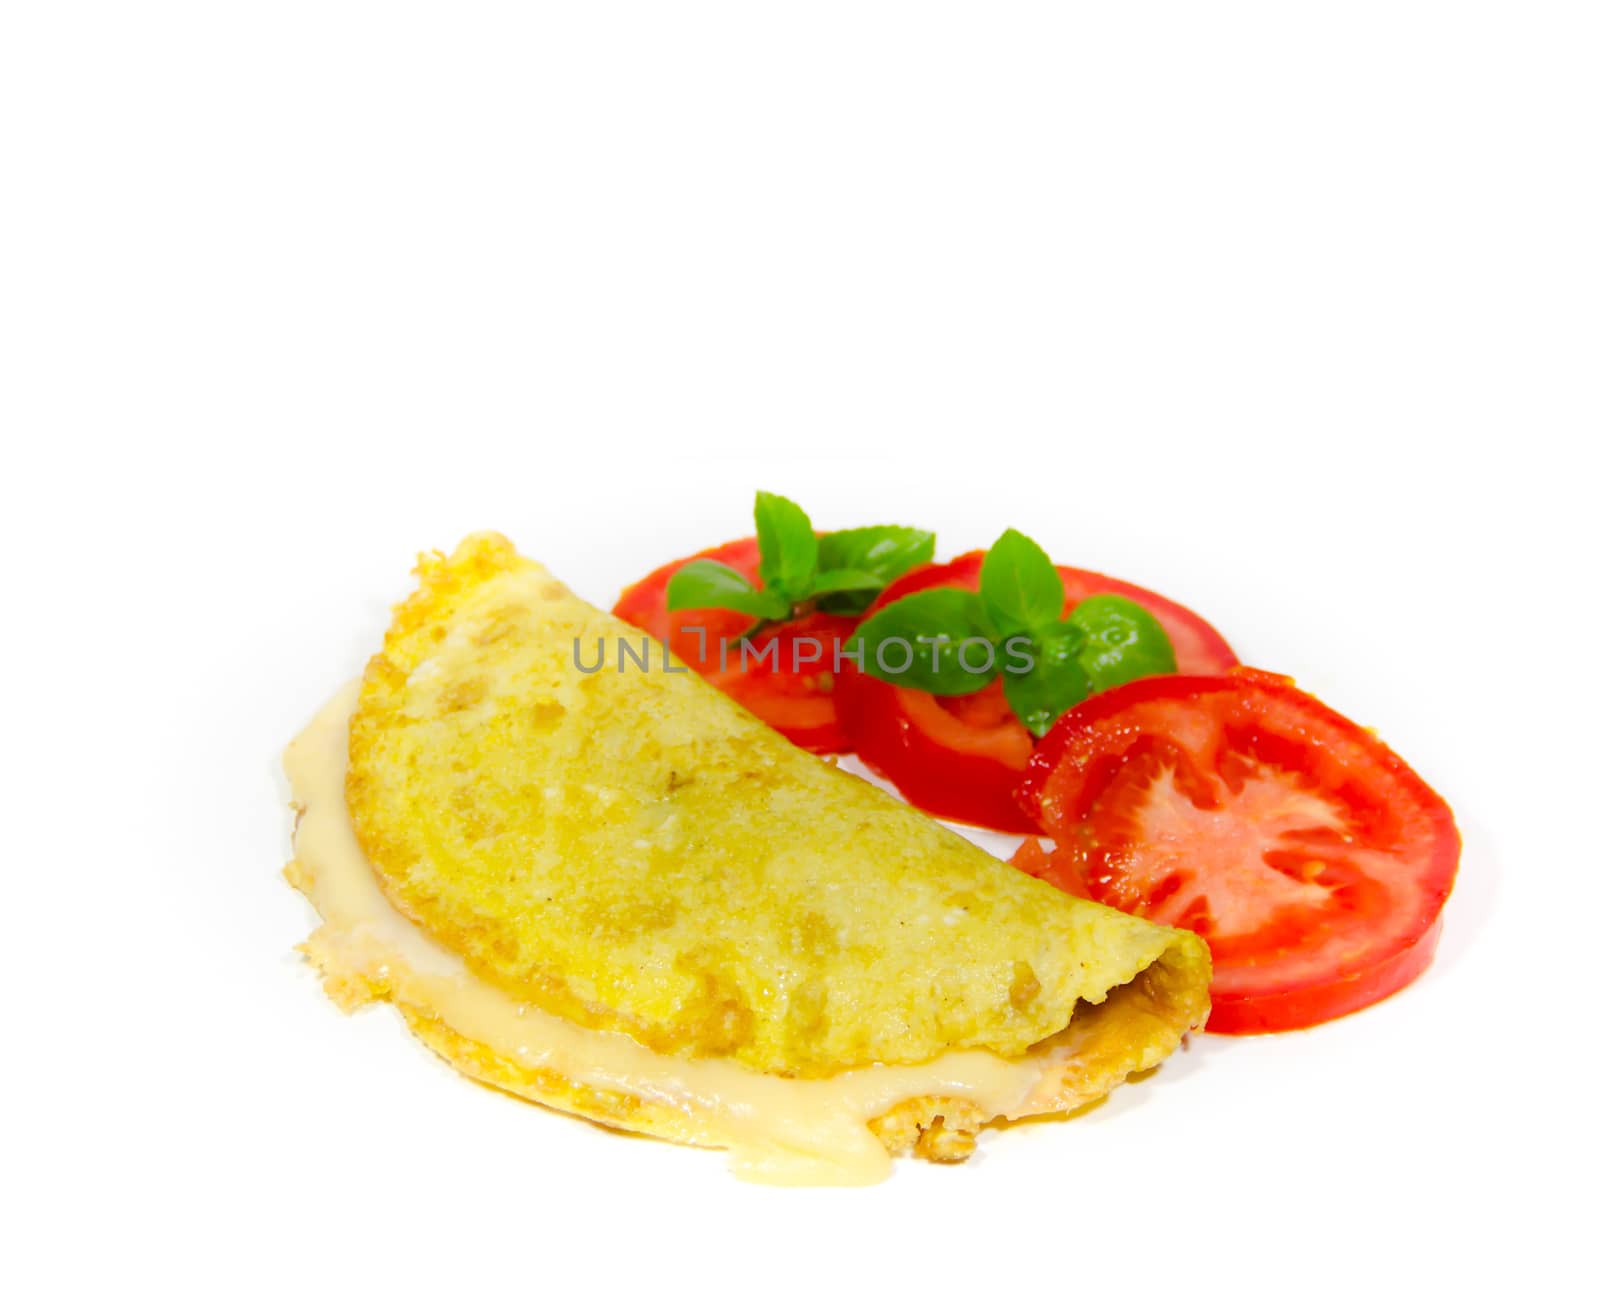 omelette made with beaten eggs stuffed with onion cheese and tomatoes on white background with sliced tomatoes and basil